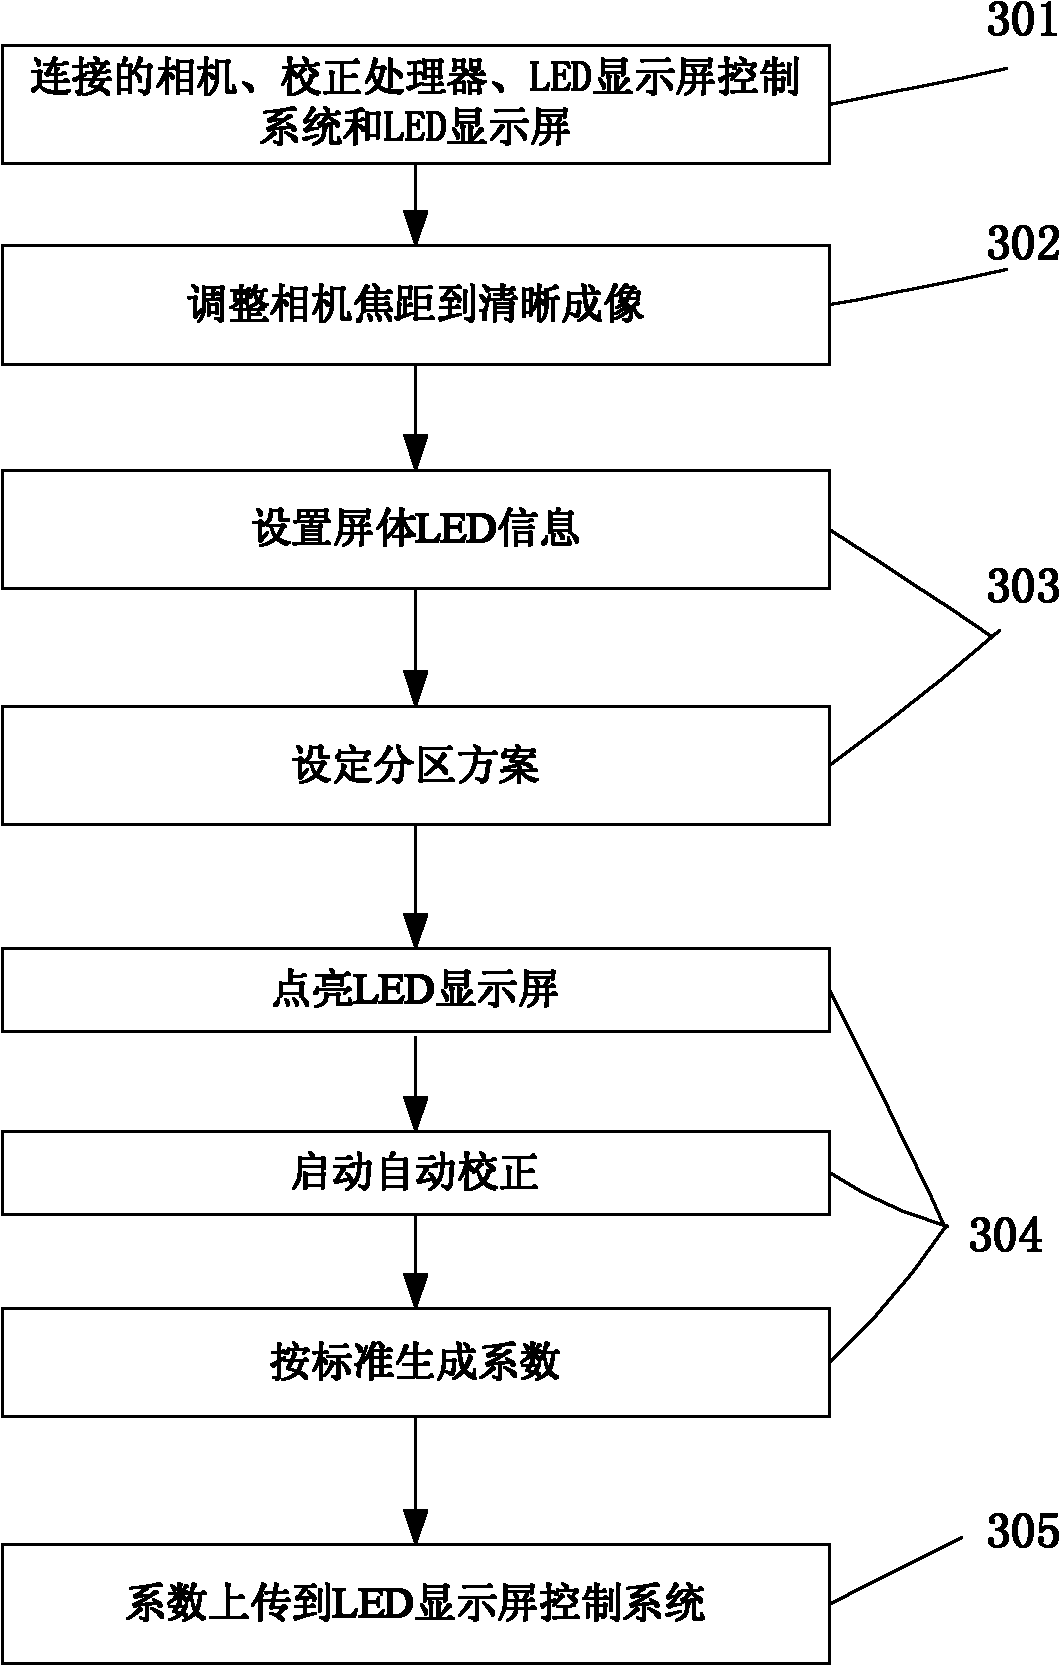 System and method for correcting brightness and chromaticity of LED display screen point by point